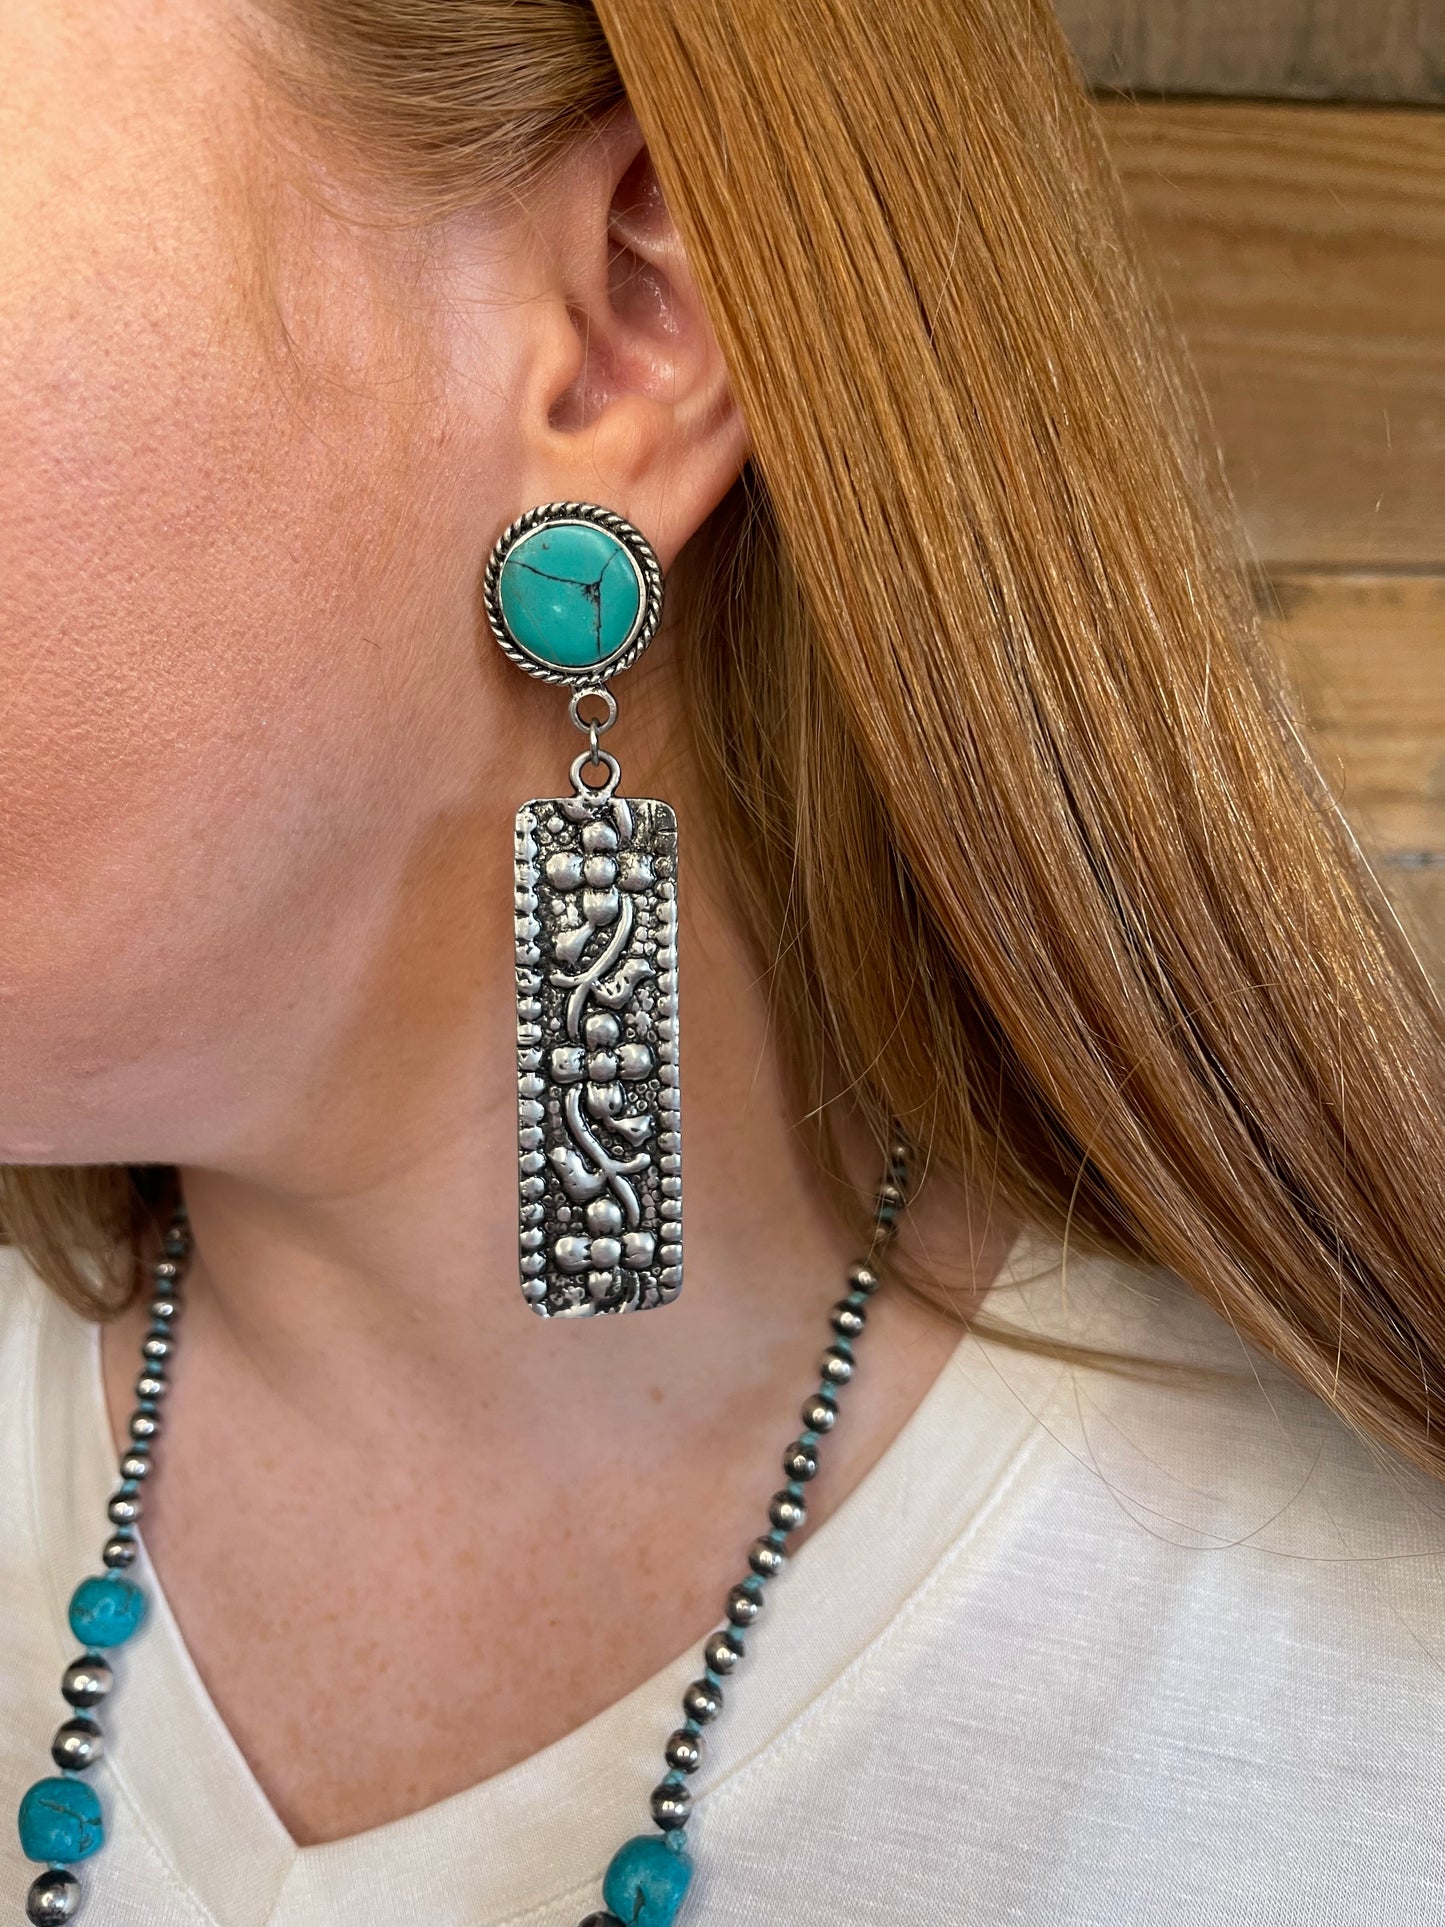 Woman wearing earring with turquoise stone and tooled silver bar